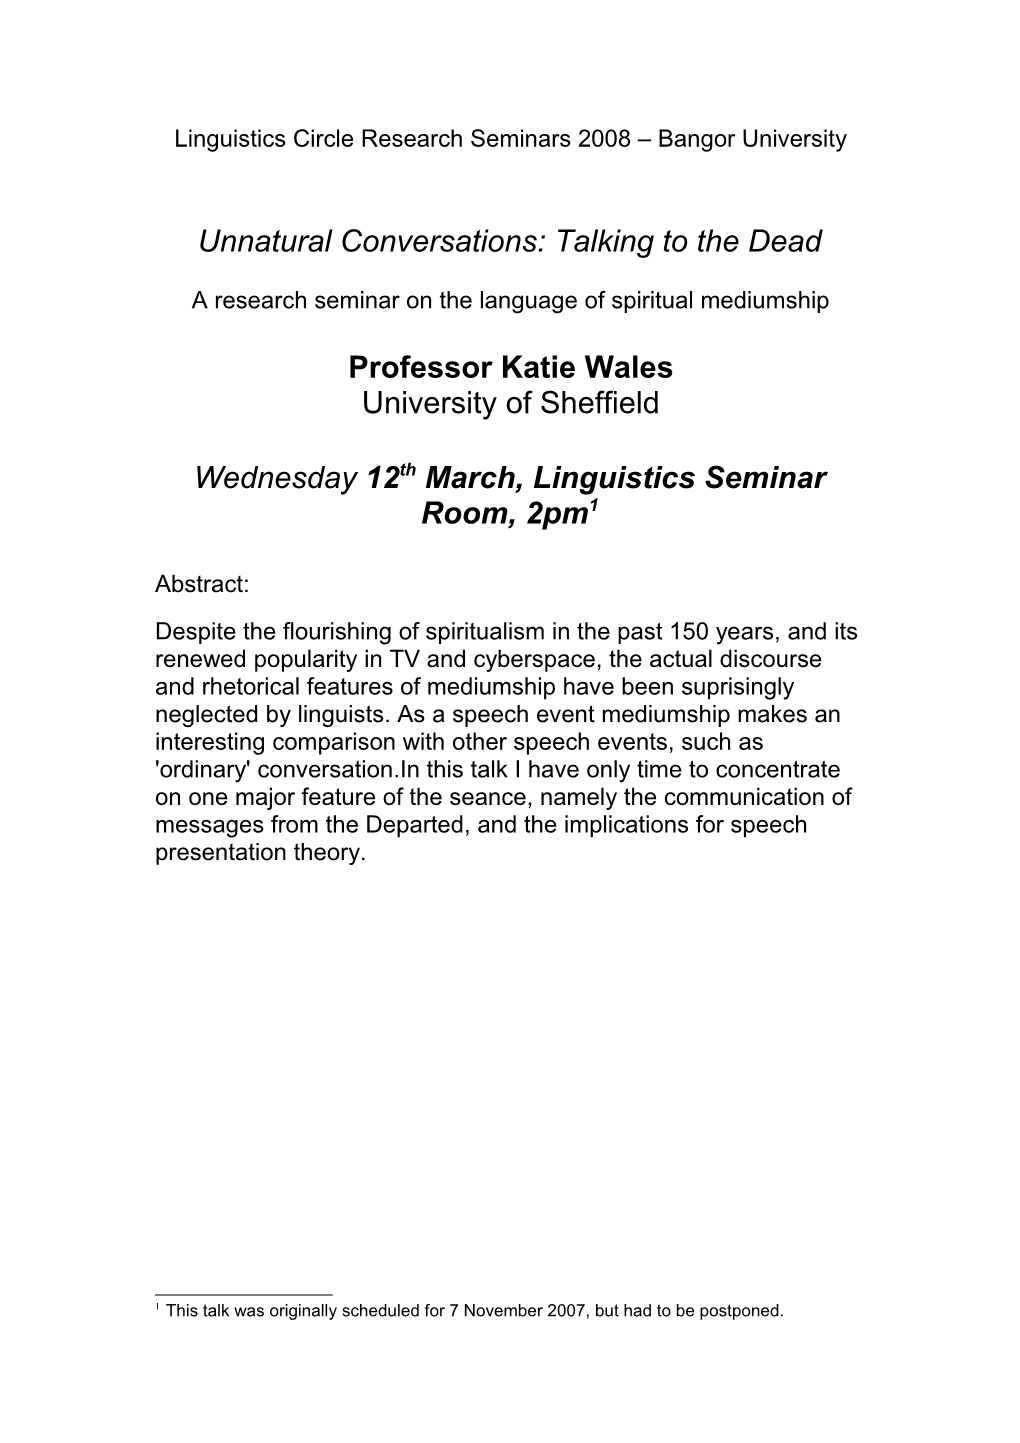 Unnatural Conversations: Talking to the Dead